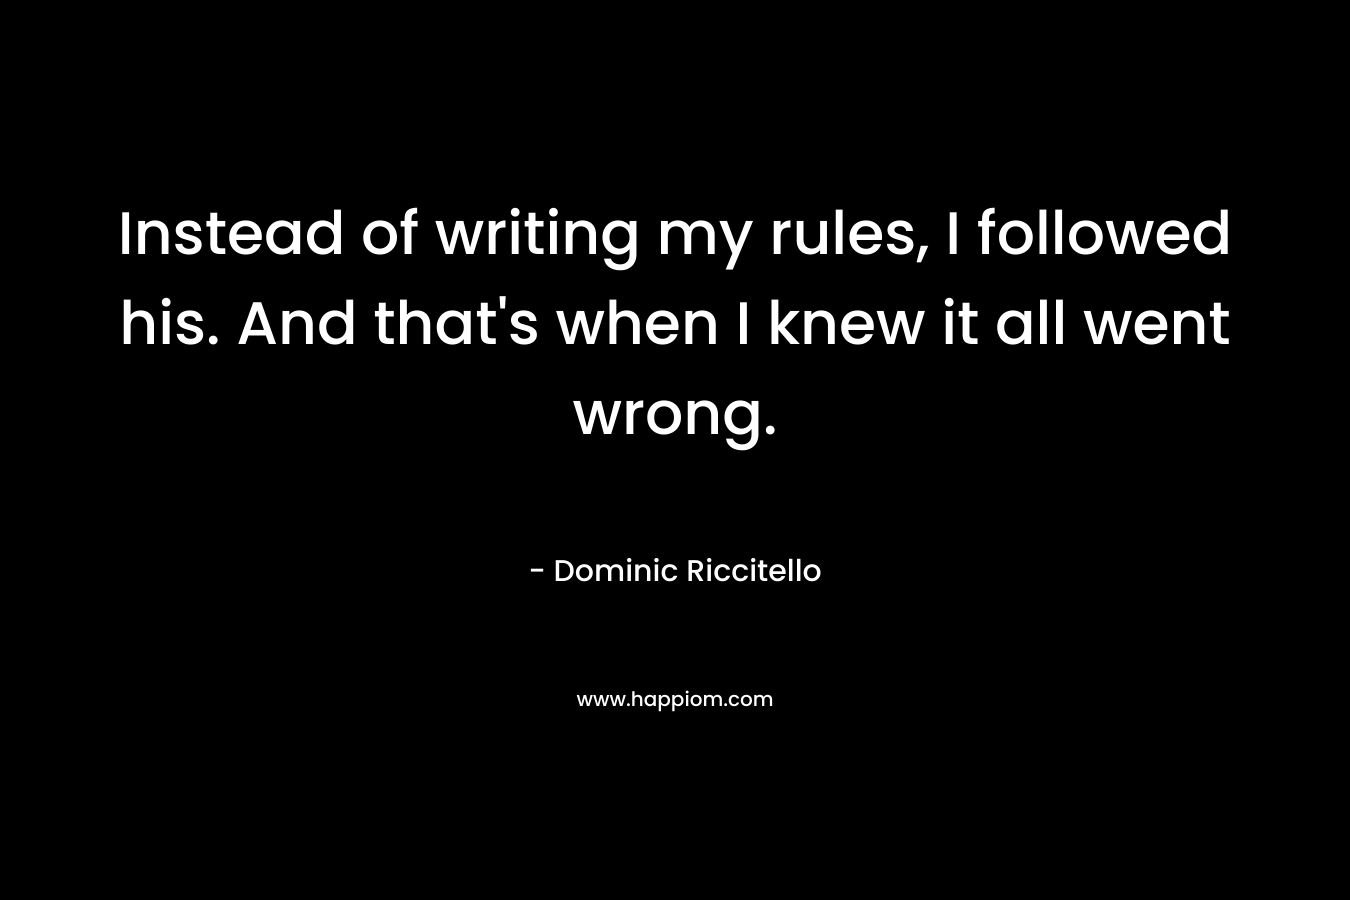 Instead of writing my rules, I followed his. And that's when I knew it all went wrong.